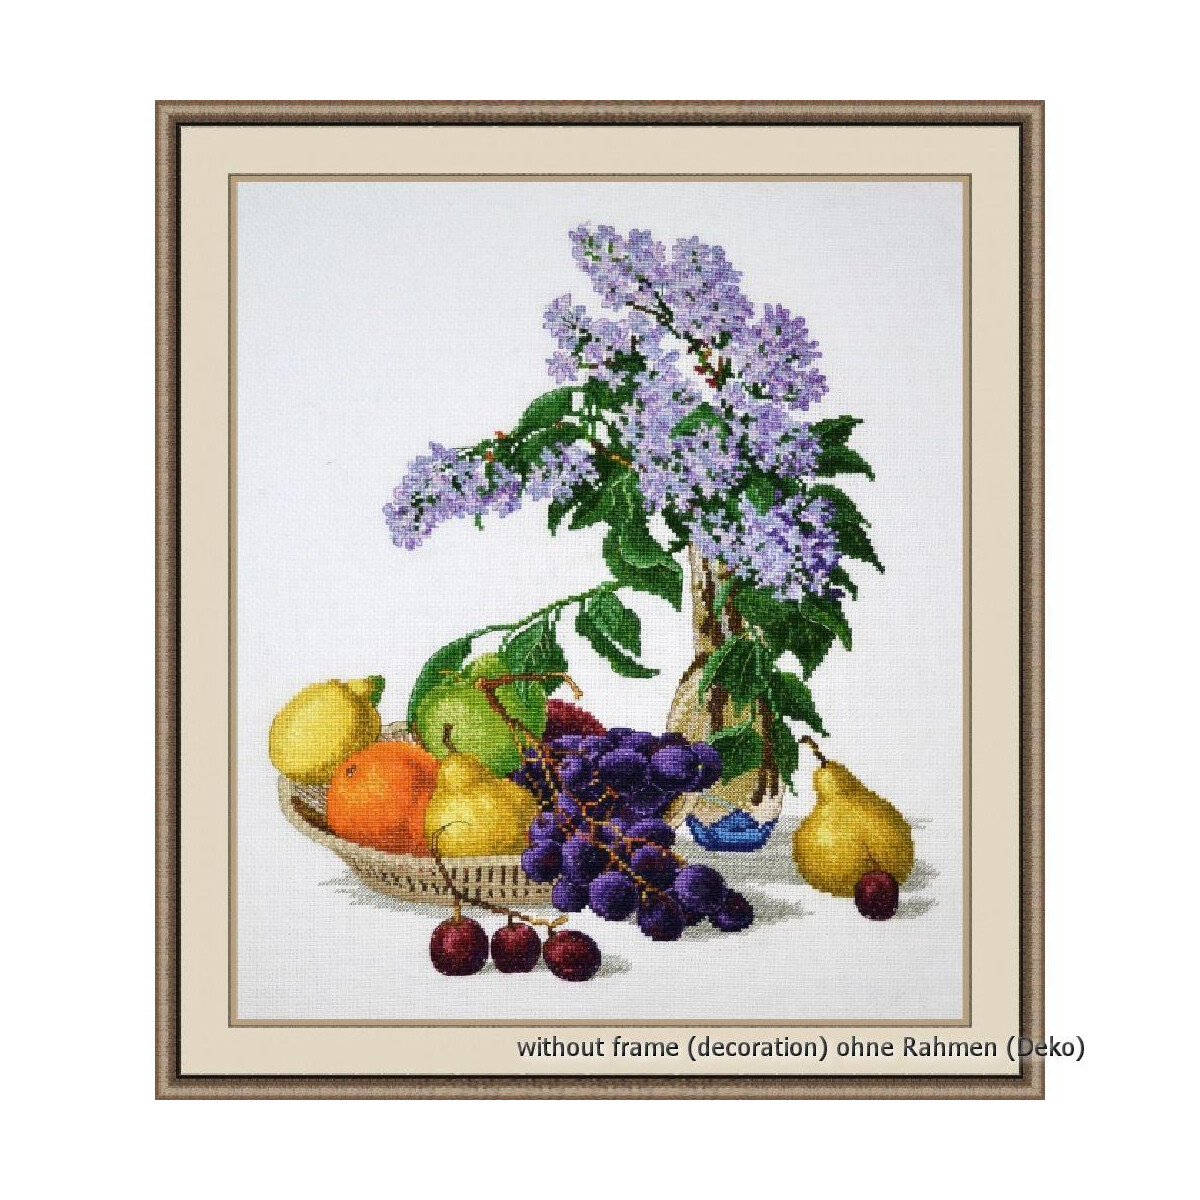 Oven counted cross stitch kit "Lilac and...